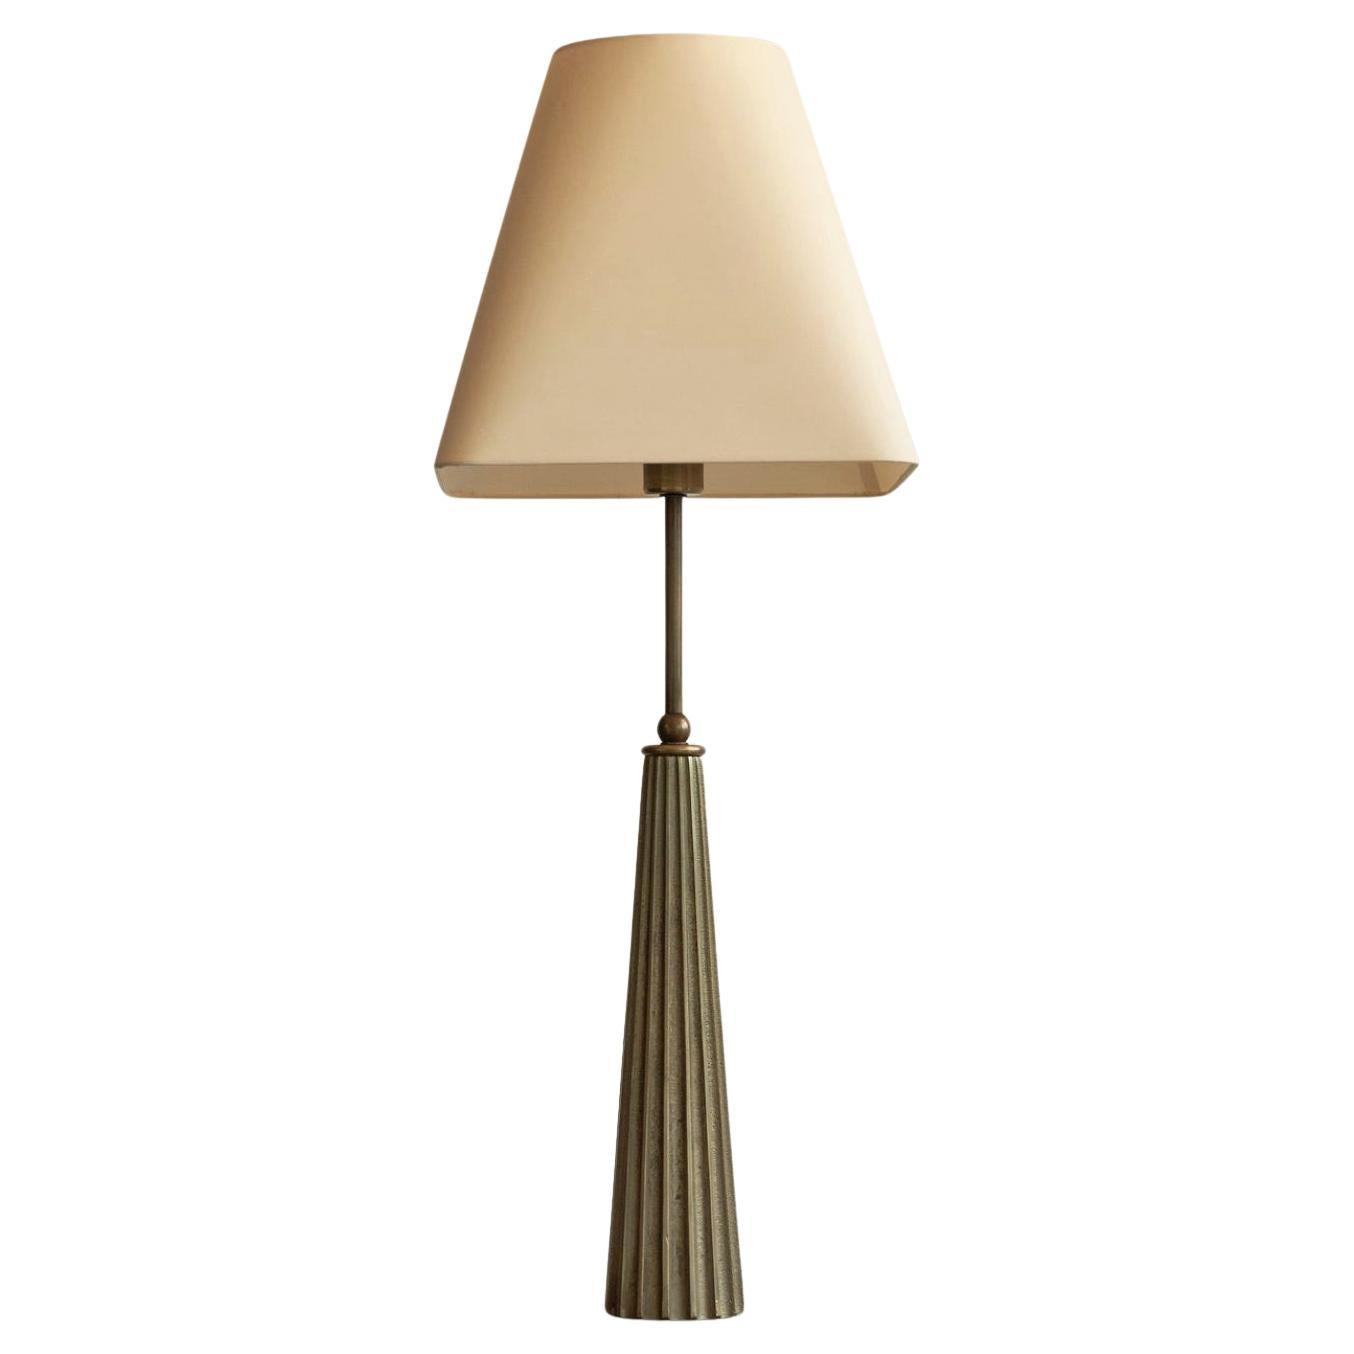 Large Brutalist Table Lamp in Cast Brass, France 1970s For Sale